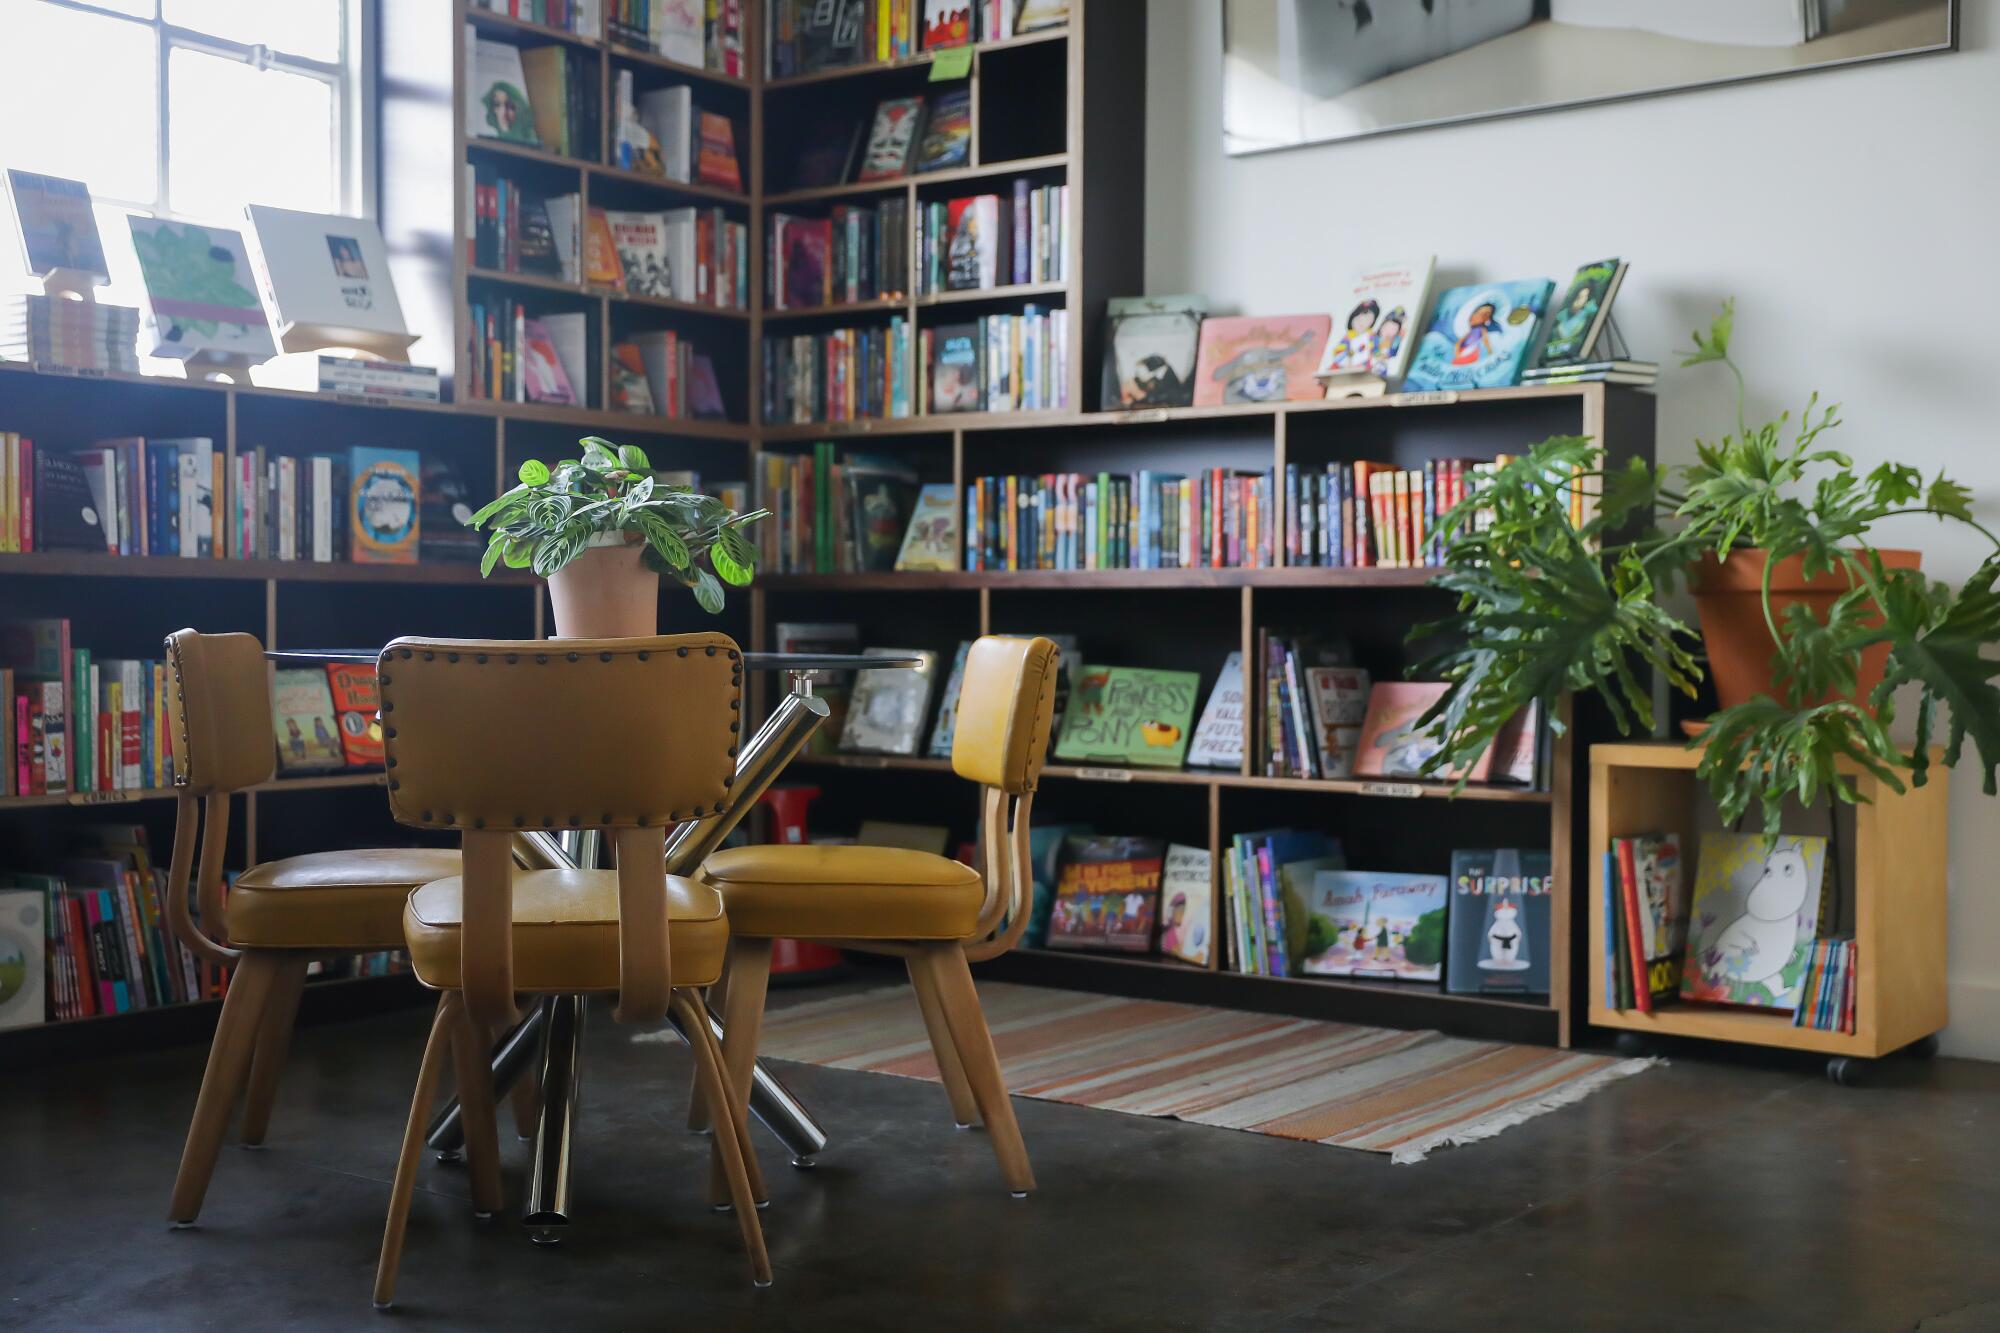 North Figueroa makes much of its 800 square feet, with more than 2,500 books and a cozy nook.